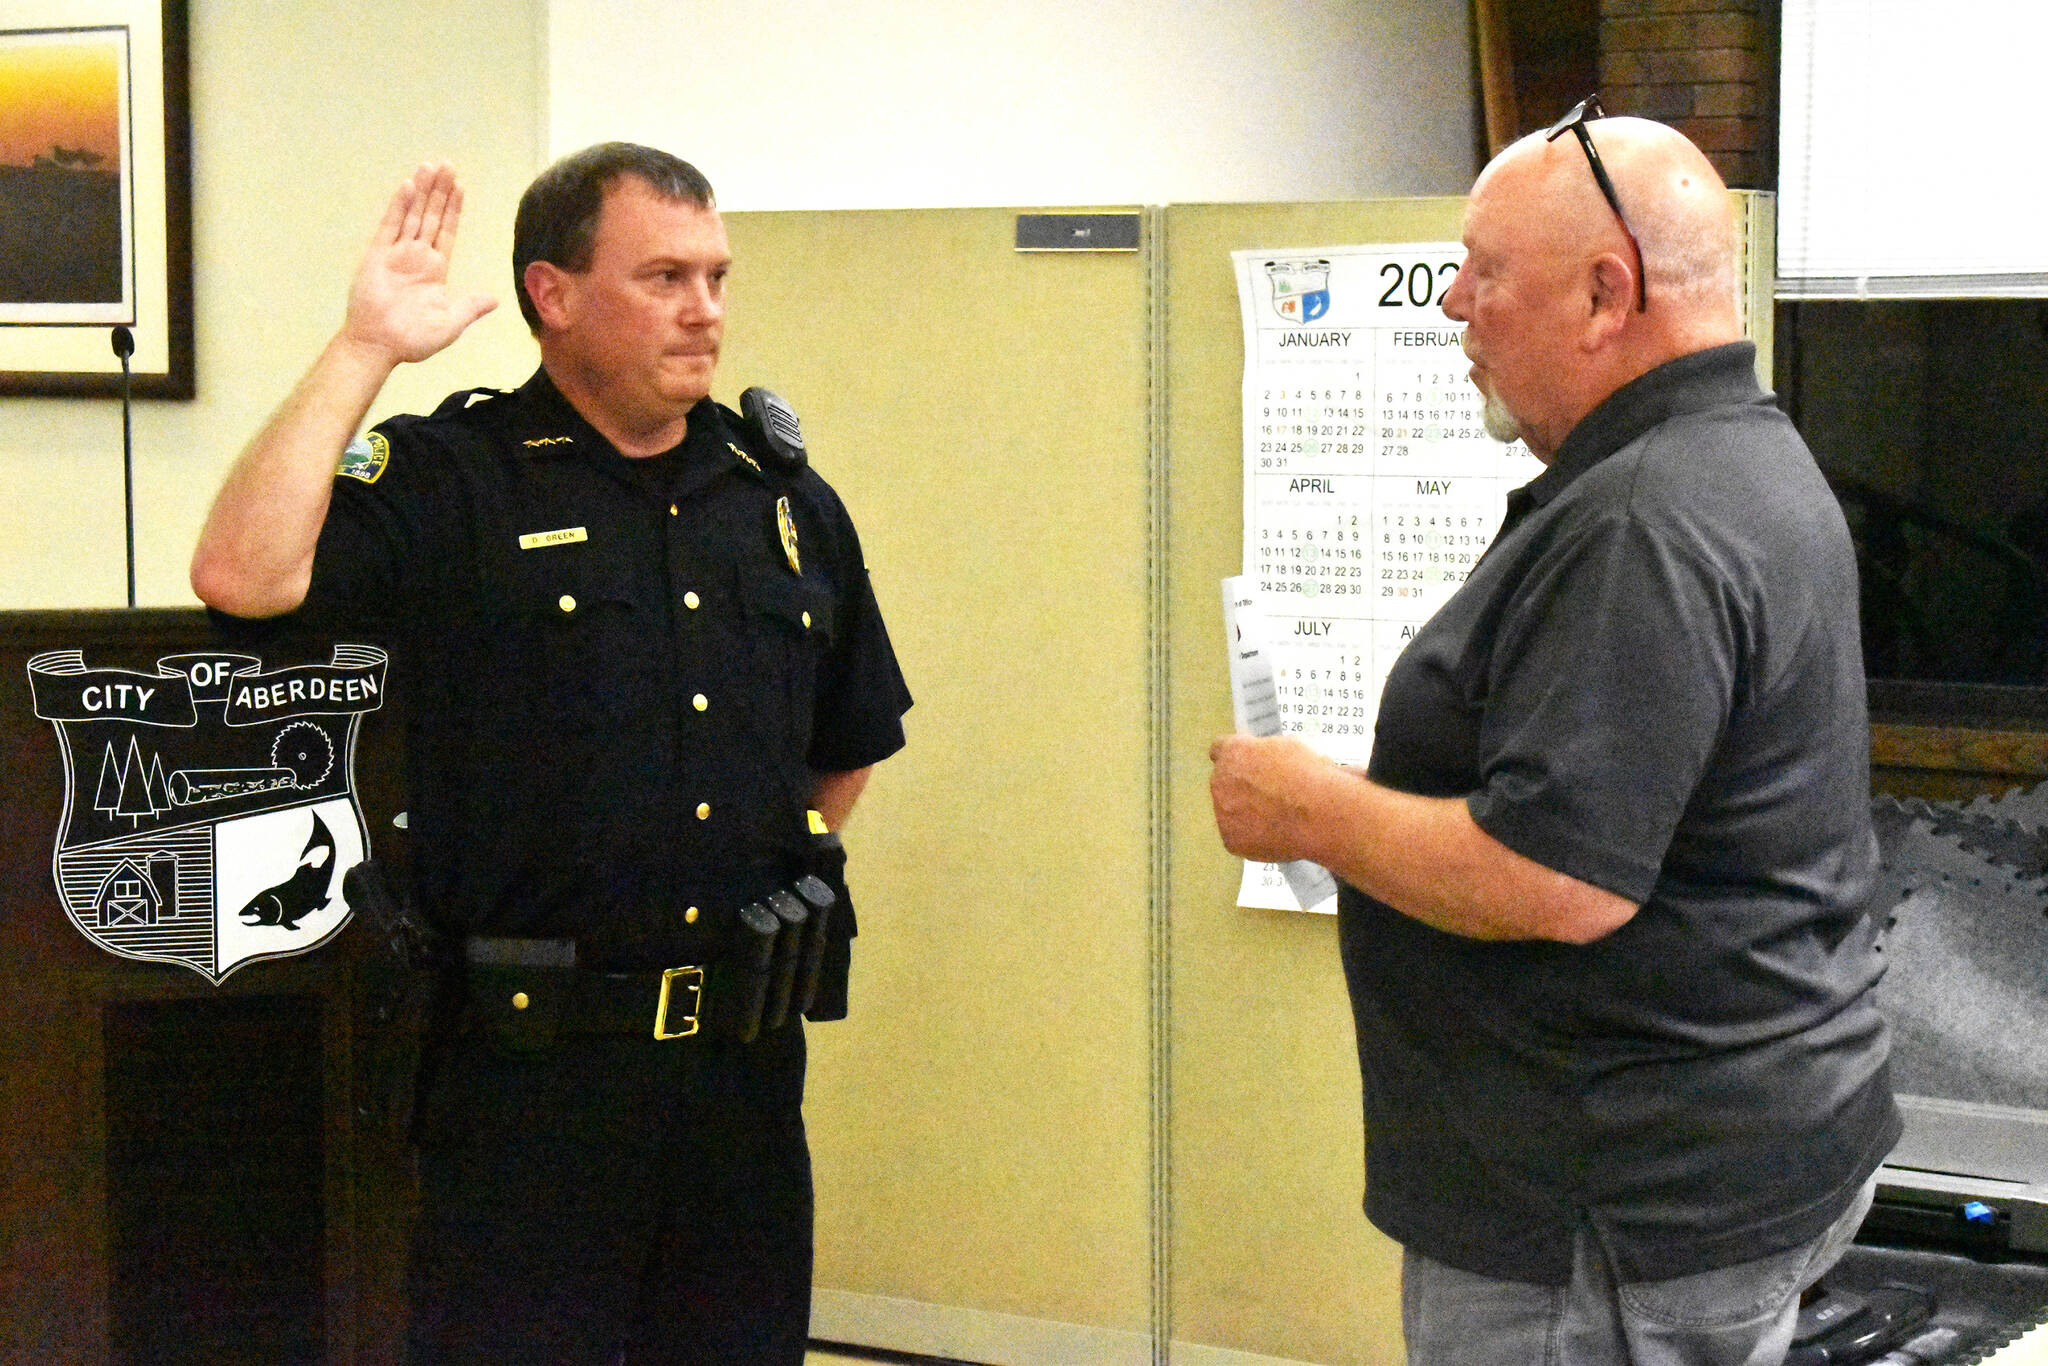 Aberdeen Police Department Chief Dale Green swears in with Aberdeen Mayor Pete Schave on Wednesday night, Sept. 28, at the Aberdeen City Council meeting in the council chambers. Green, who was interim chief since now-retired Chief Steve Shumate retired June 30, will start as chief of police on Saturday, Oct. 1. (Matthew N. Wells | The Daily World)